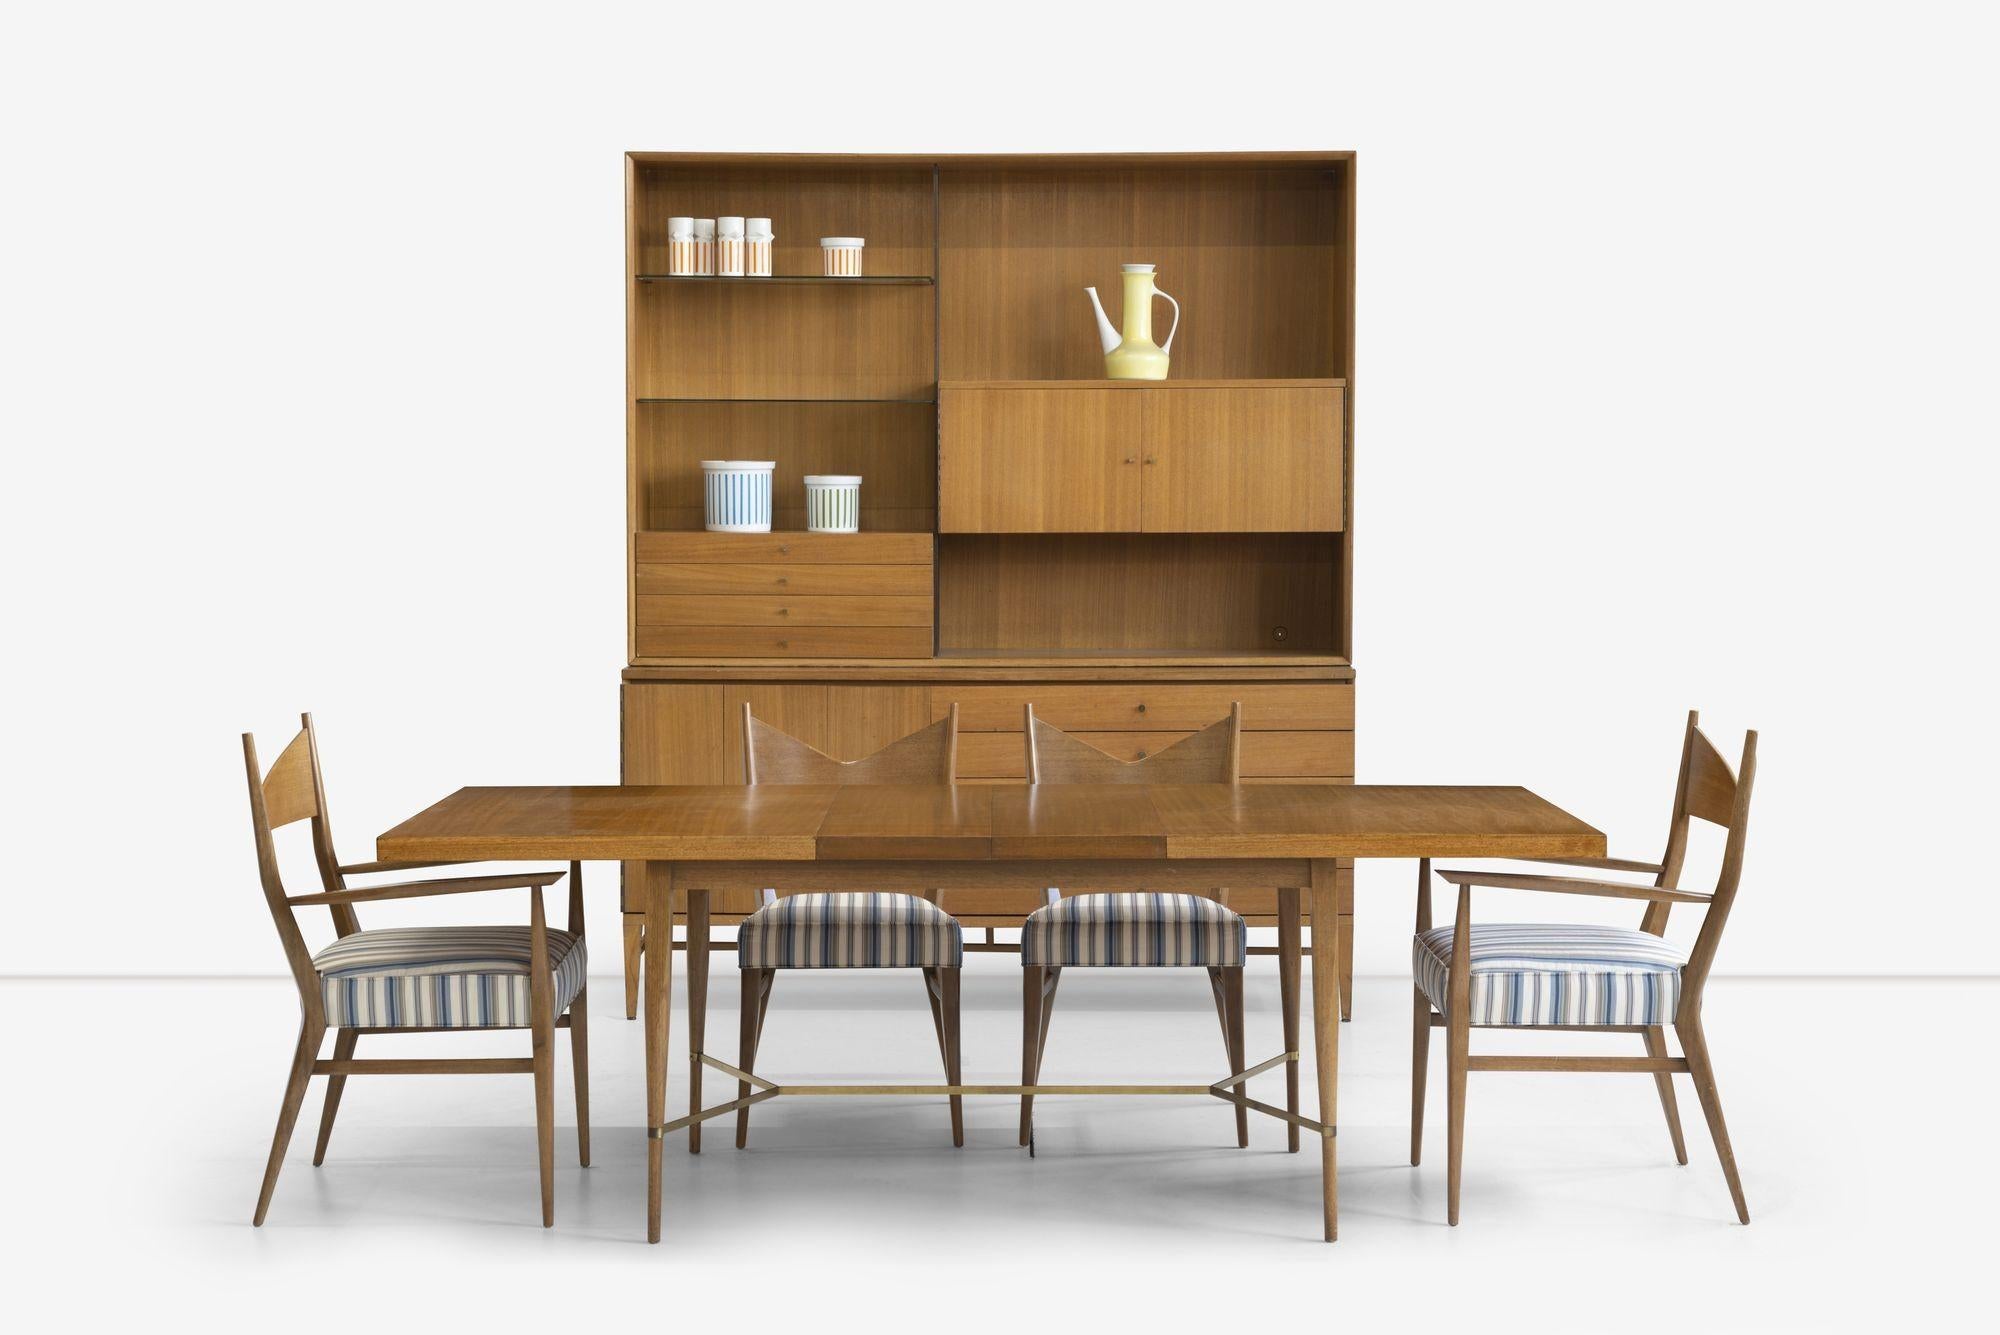 Paul McCobb Room Divider for Calvin Furniture Company, Features Mahogany, solid brass and glass shelves.
Lower section has Five Drawers with brass knob pulls and closed storage behind folding doors and measures 71.50